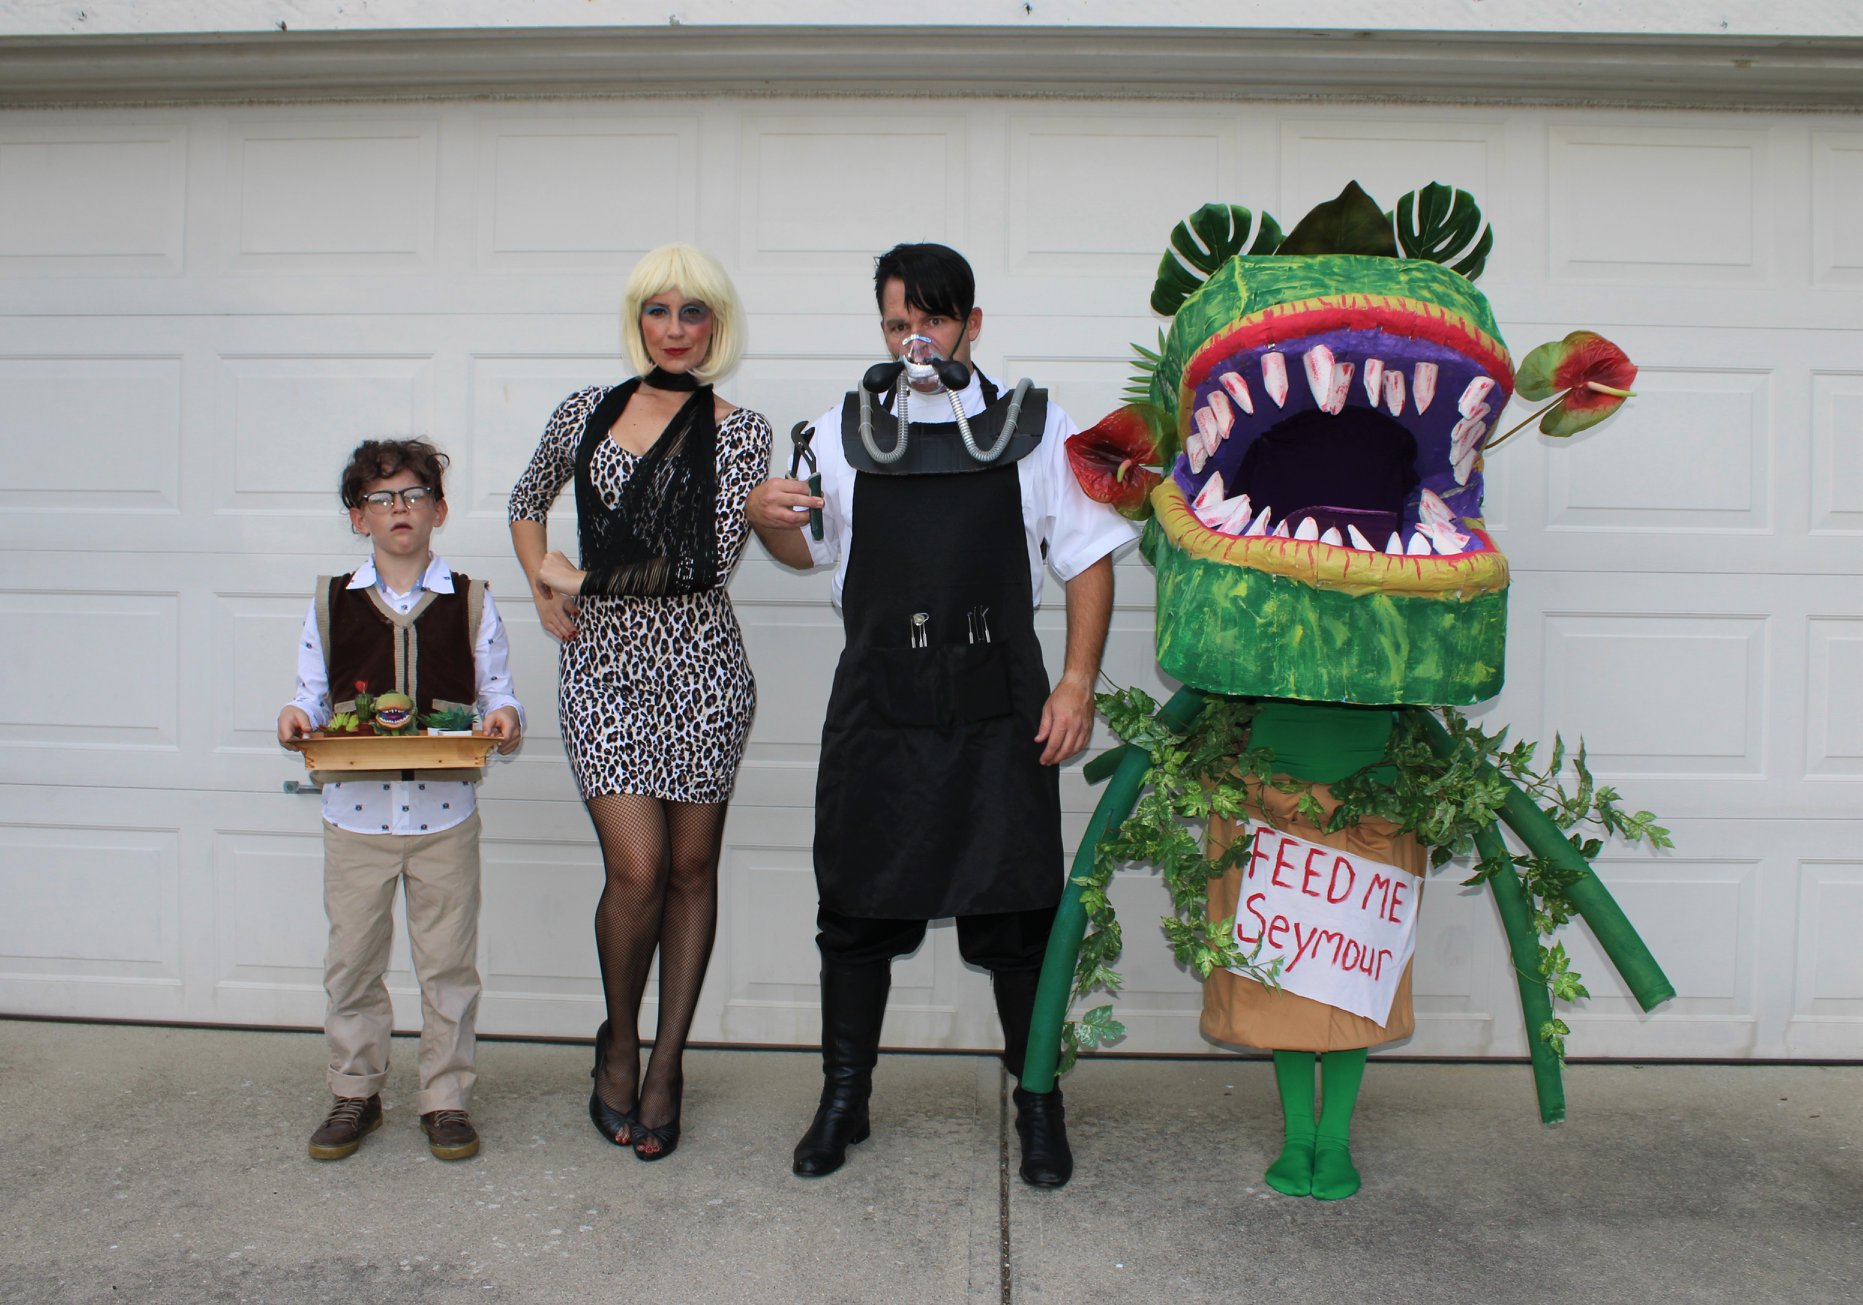 Little shop of horrors costumes